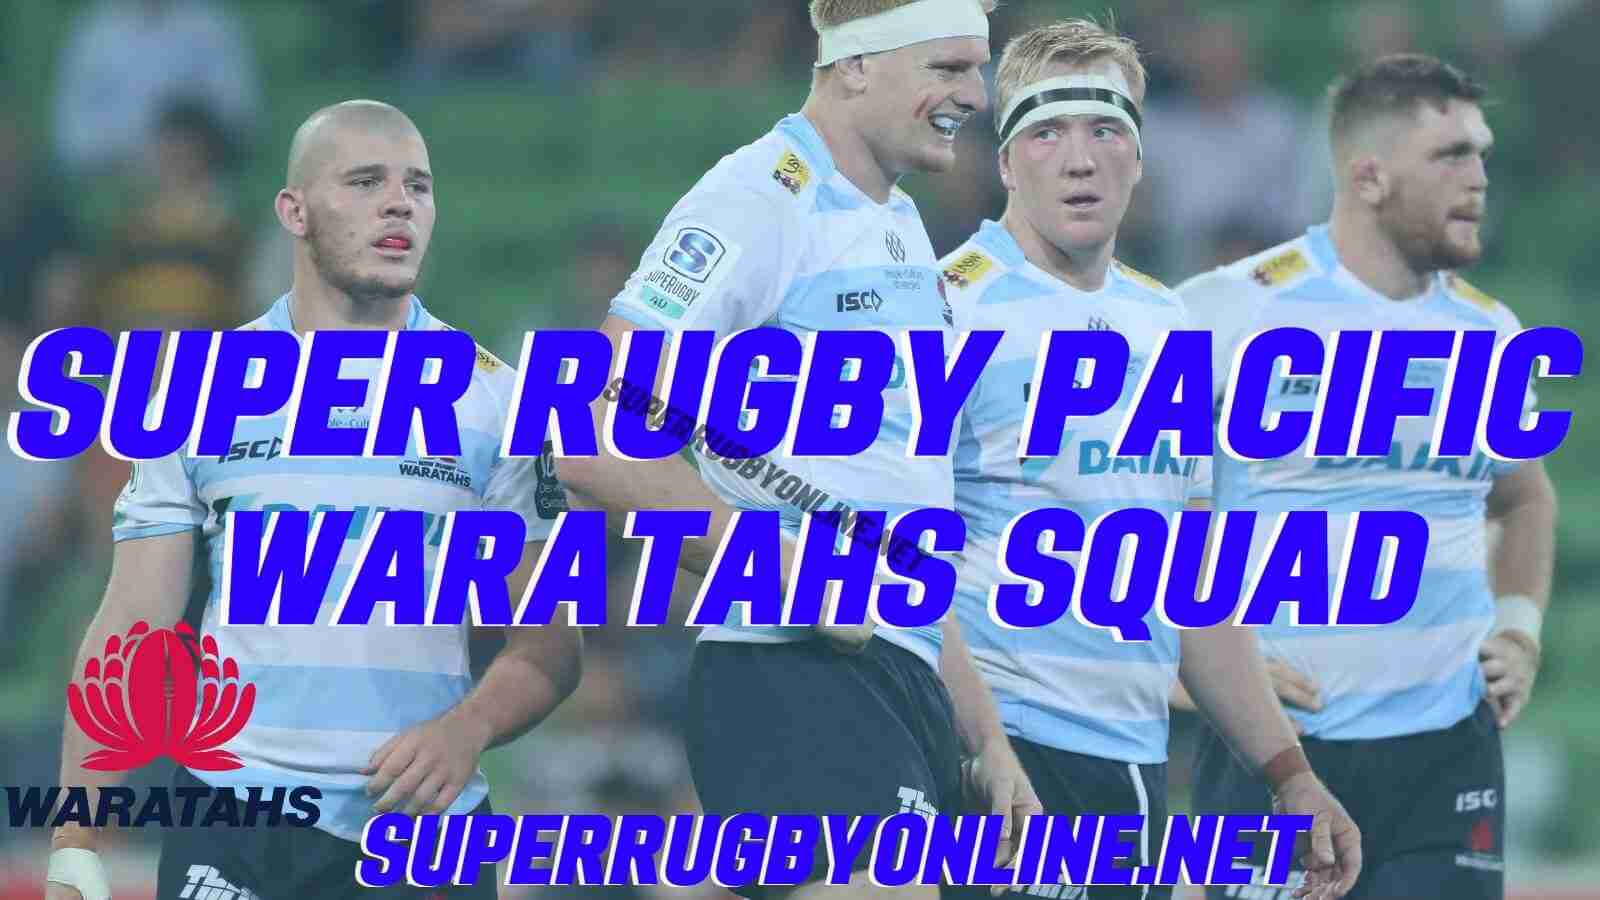 nsw-waratahs-squad-super-rugby-pacific